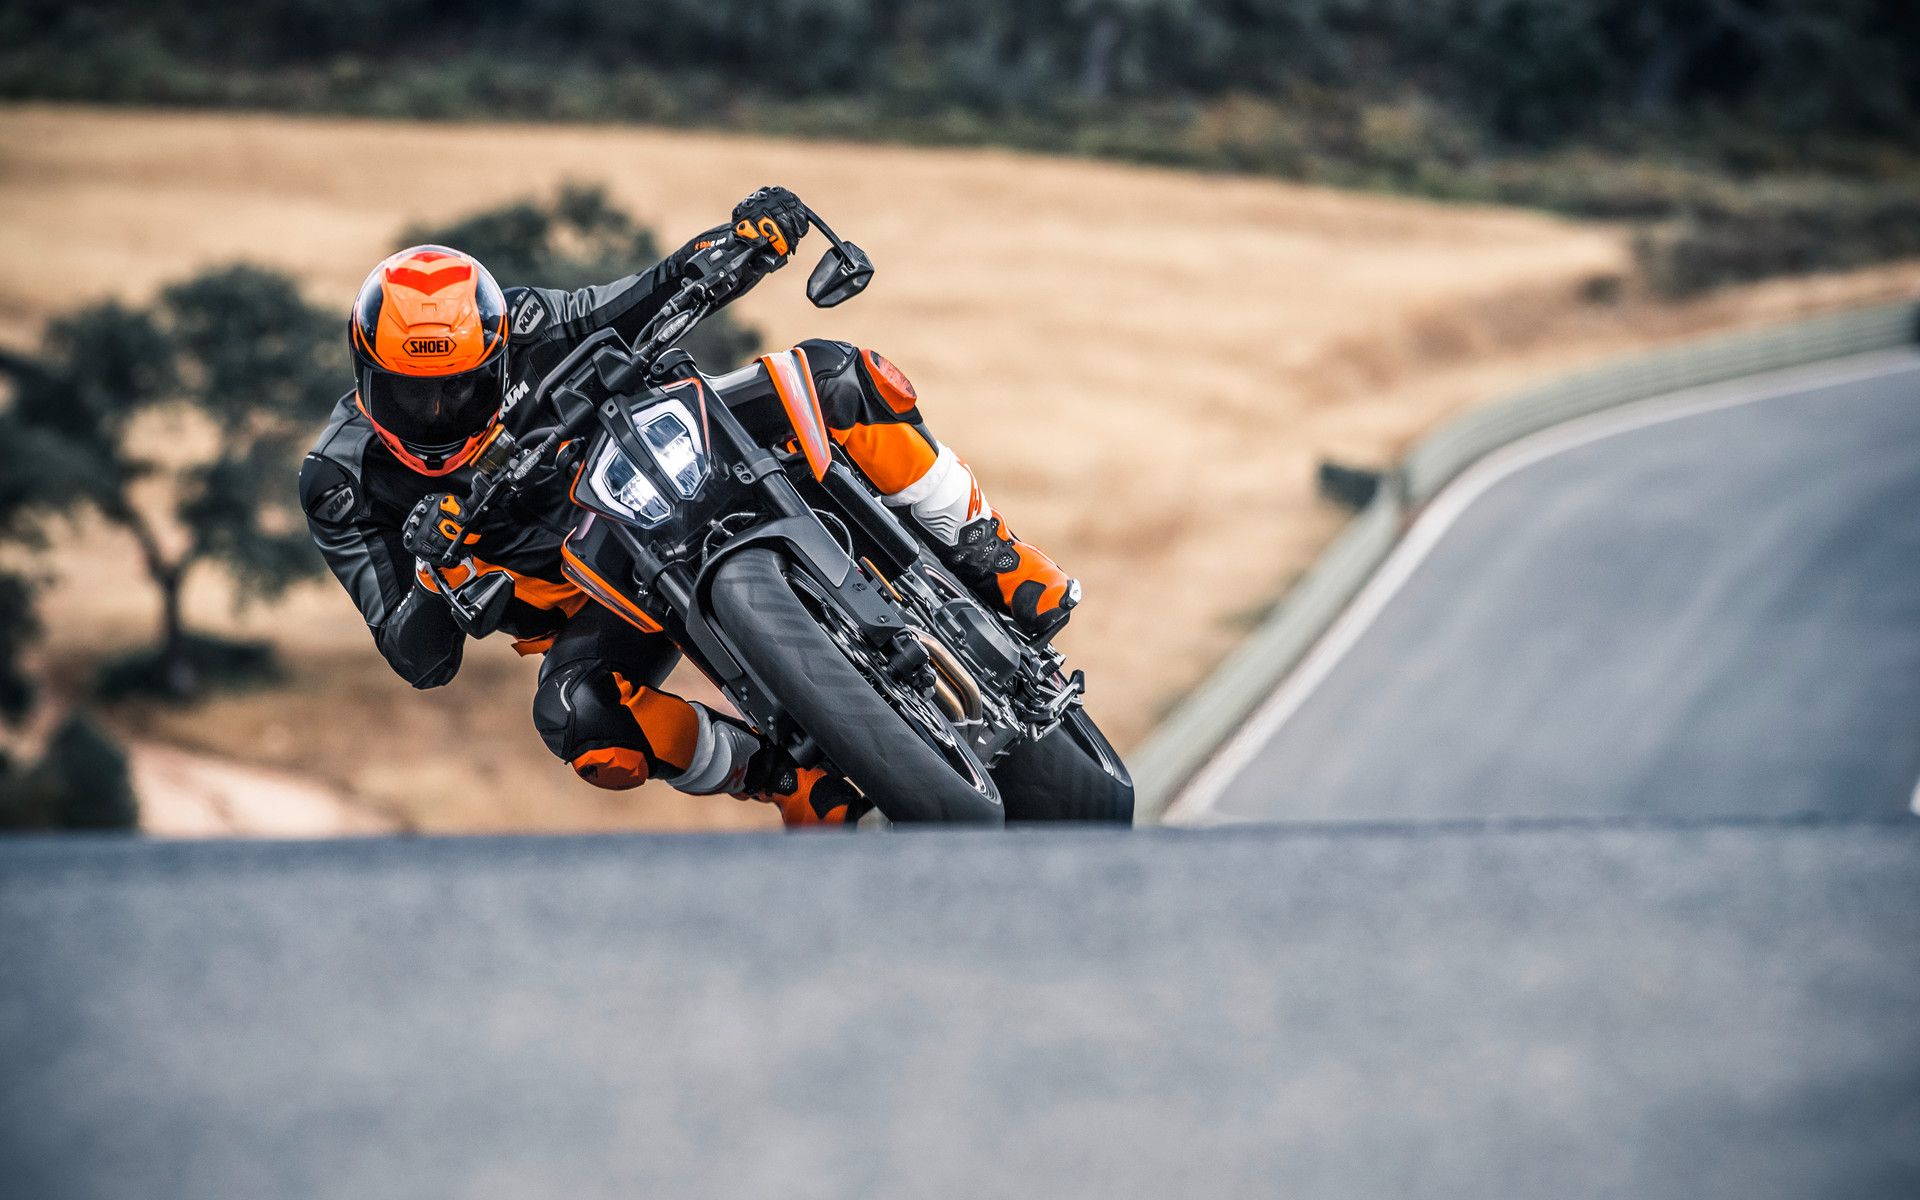  It is powered by a new super-compact 799cc parallel-twin, first in KTM